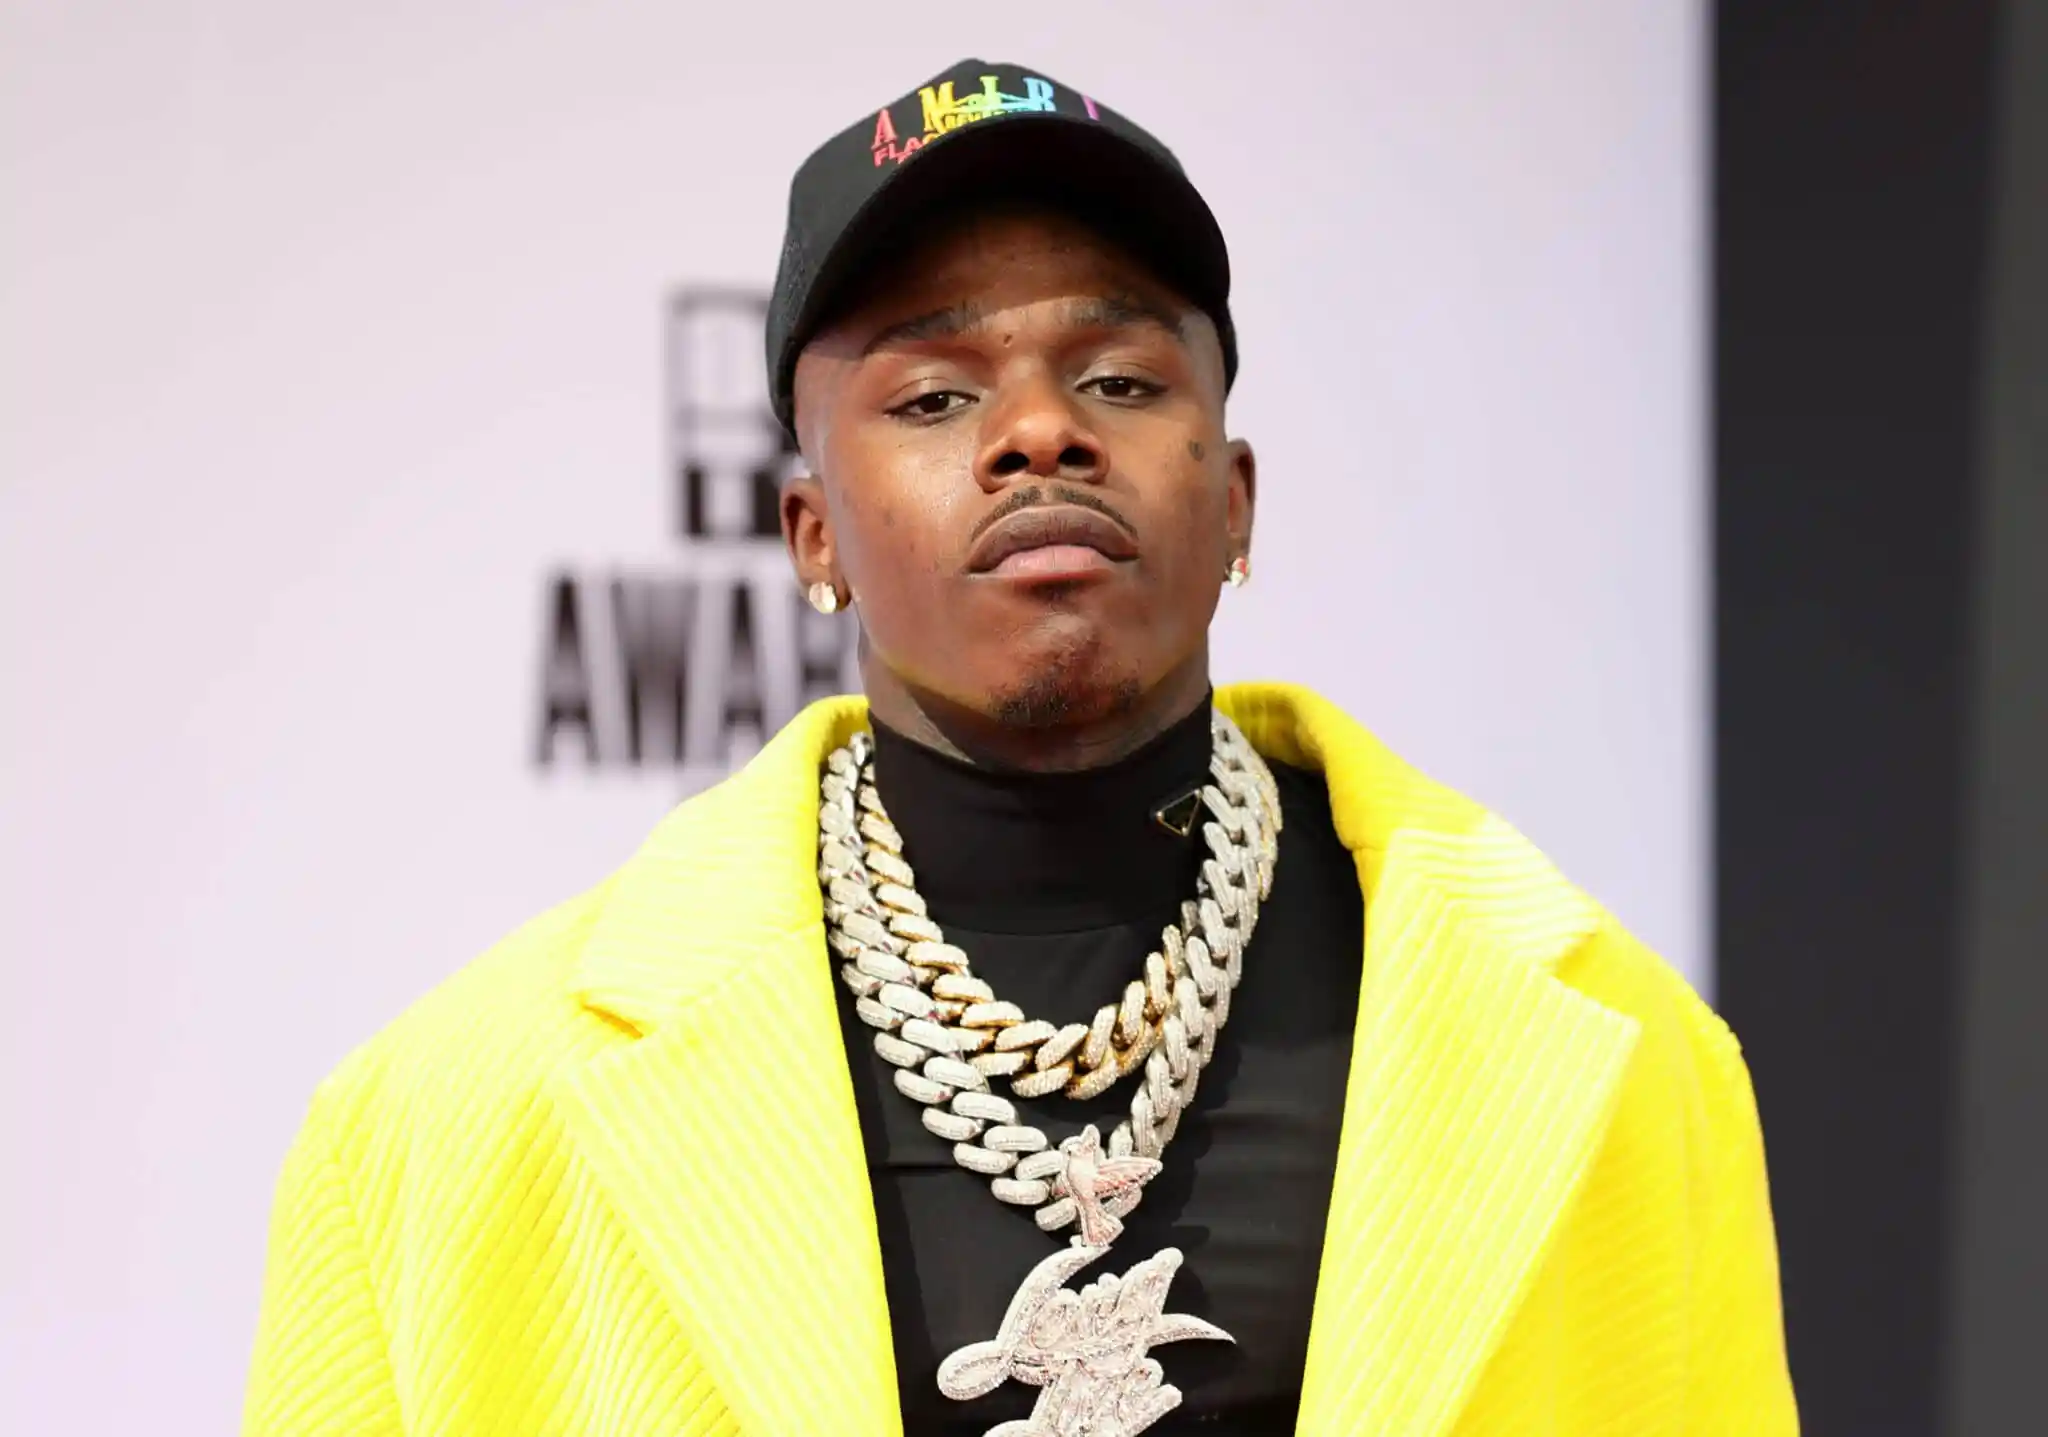 Whats Up With Judges In DaBaby 2021 Grammys Performance